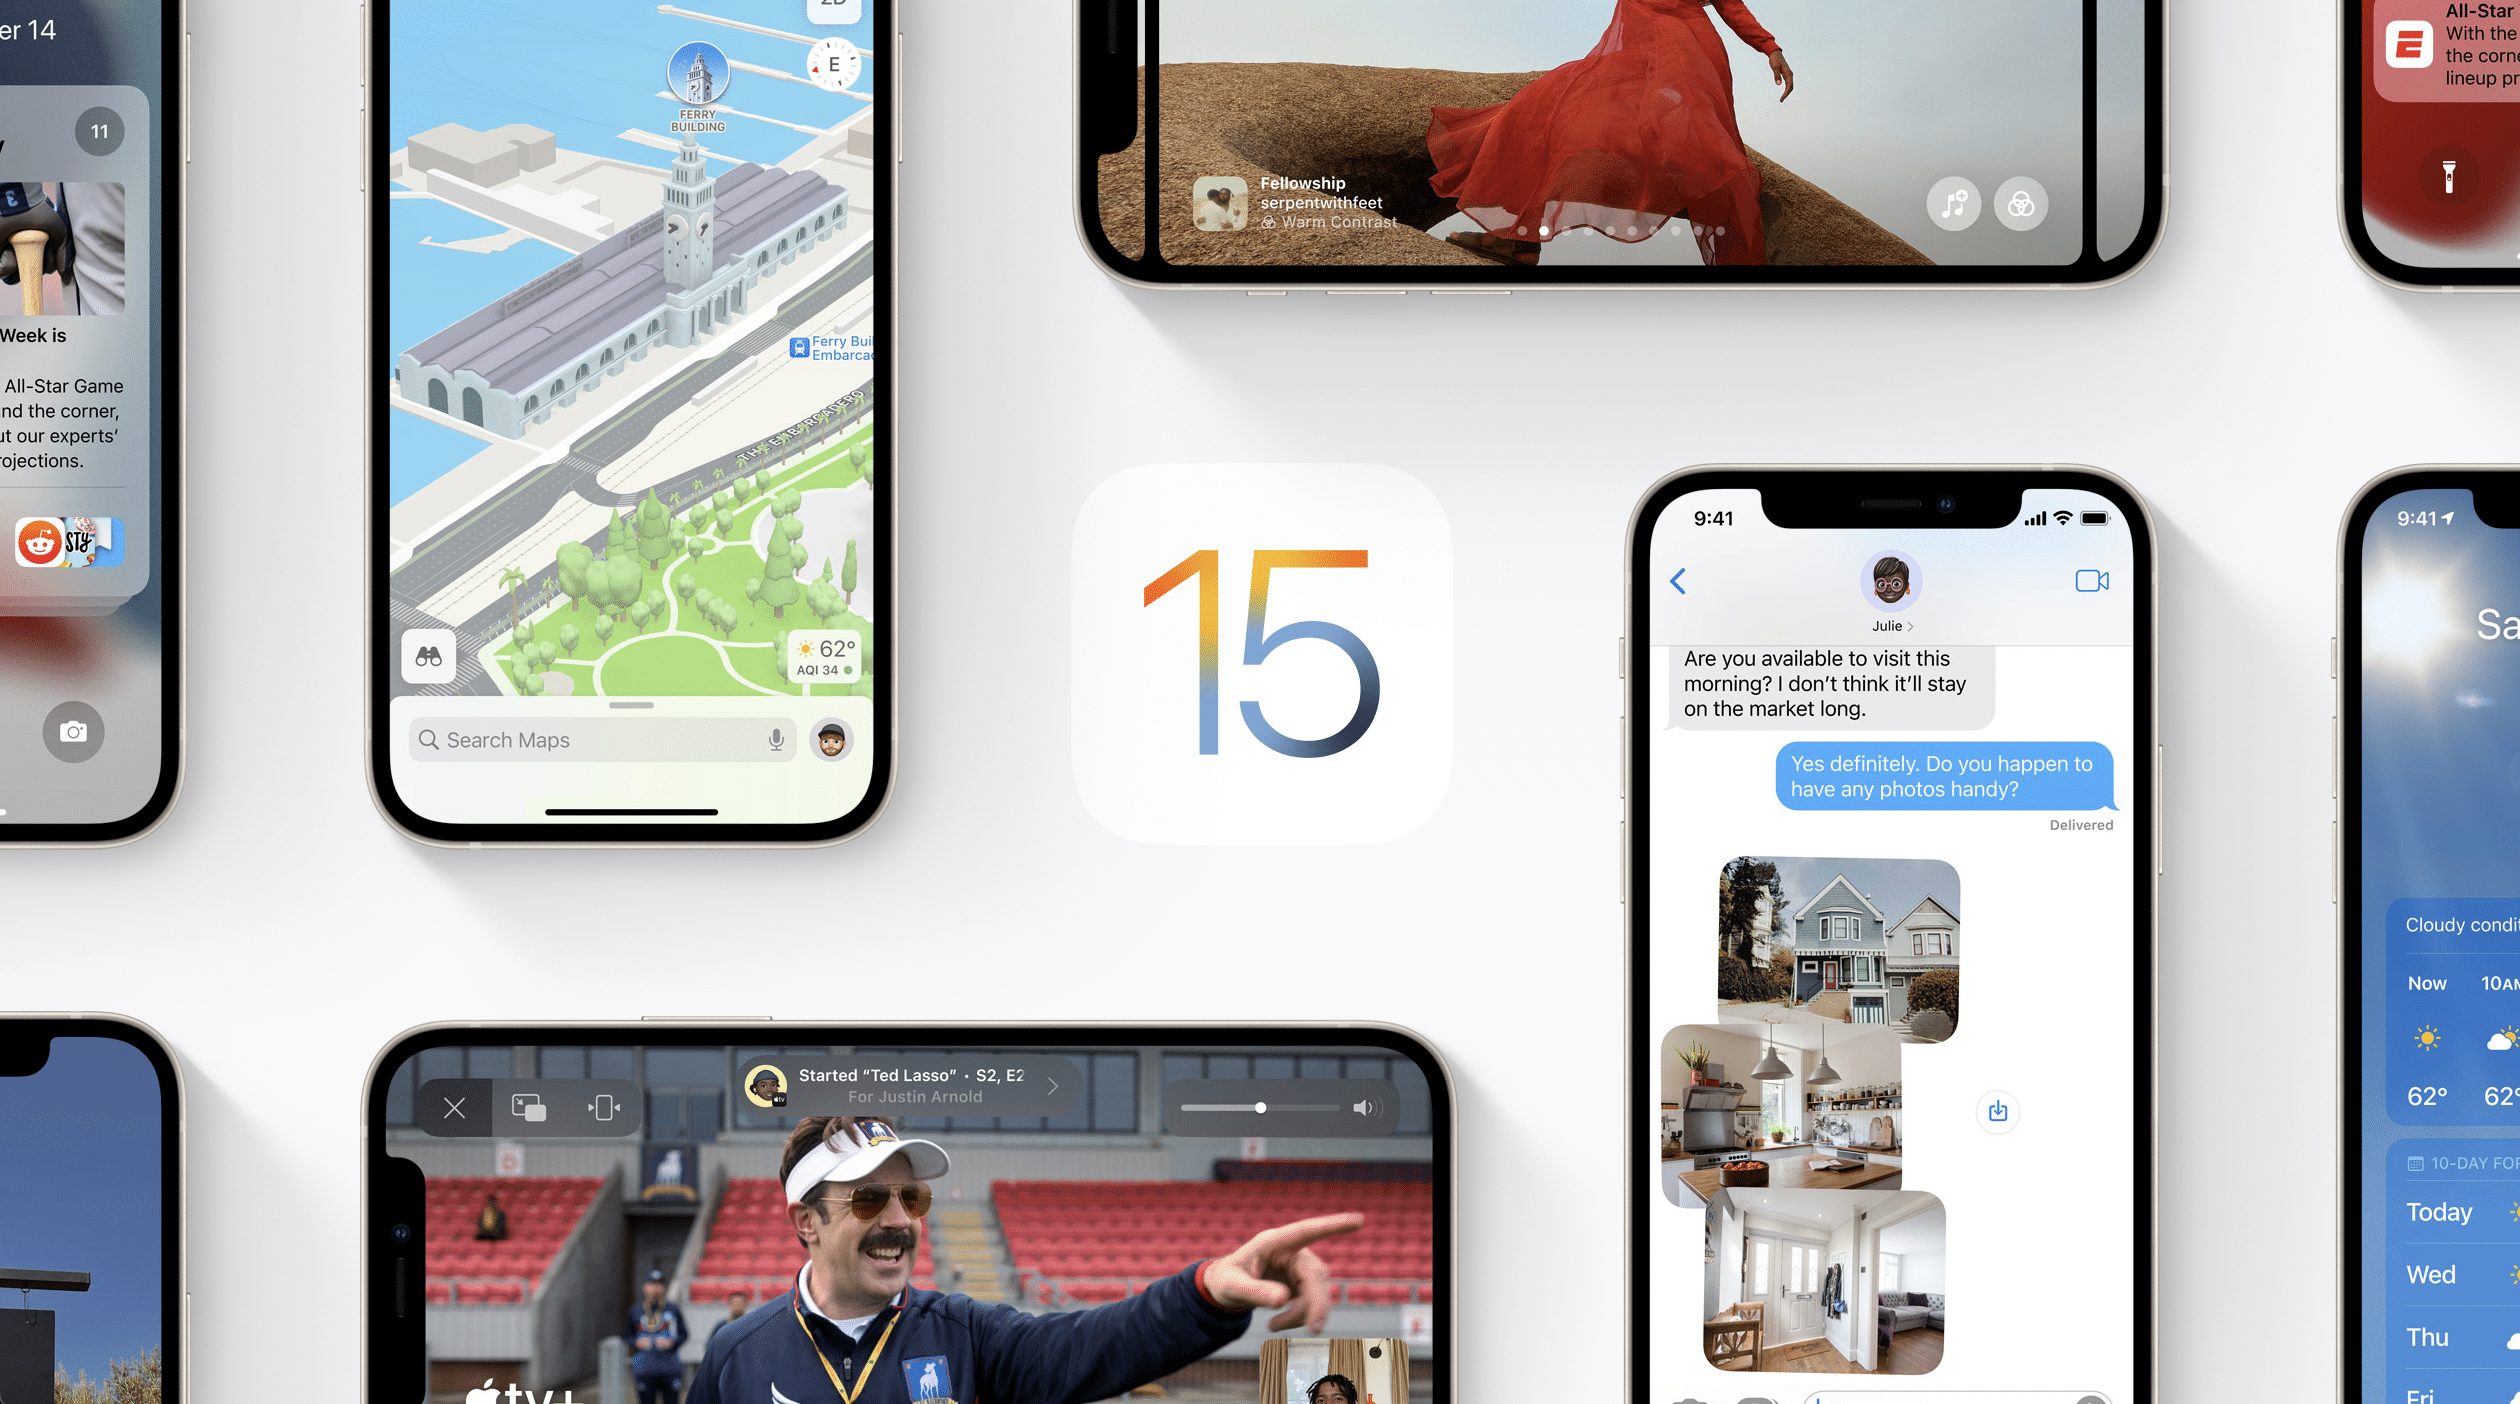 My Annotated Version of iOS 15 Release Notes